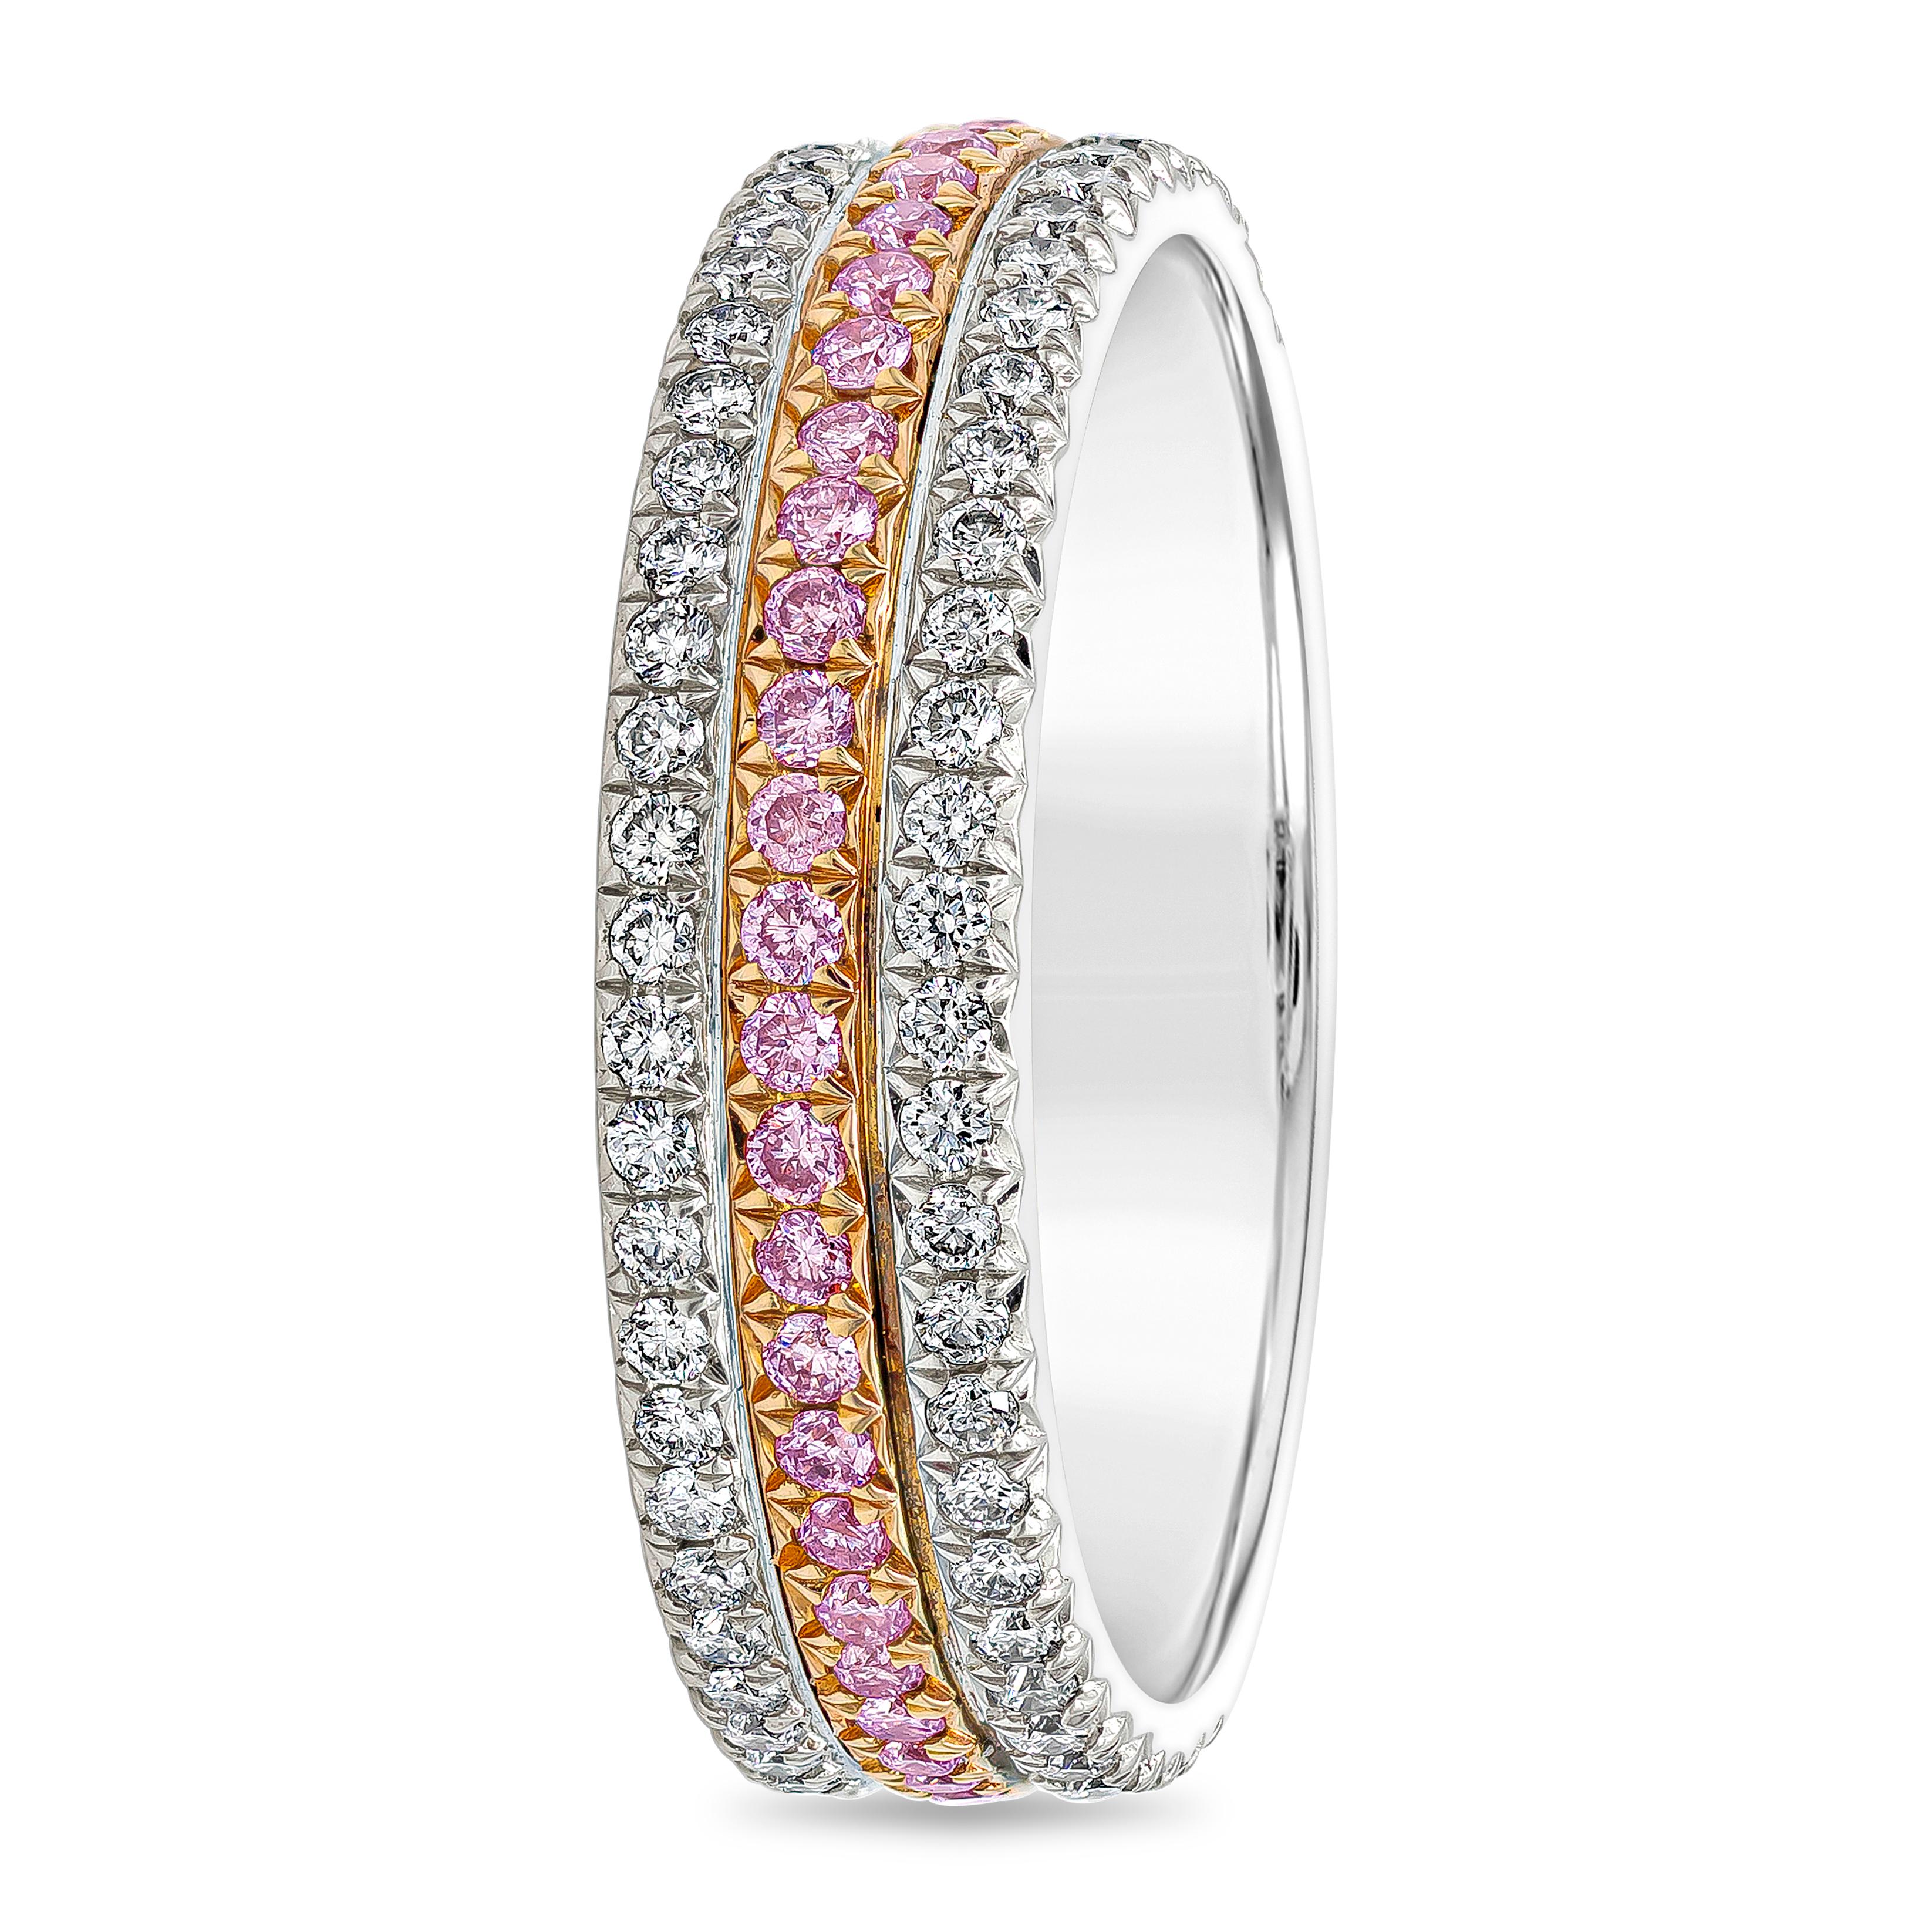 Elevate glamour and style with this three row diamond wedding band. Sandwiched in-between 2 rows of sparkling round diamonds is a line of color-rich pink diamonds set in 18k rose gold. Pink diamonds weigh 0.25 carats total while white diamonds weigh